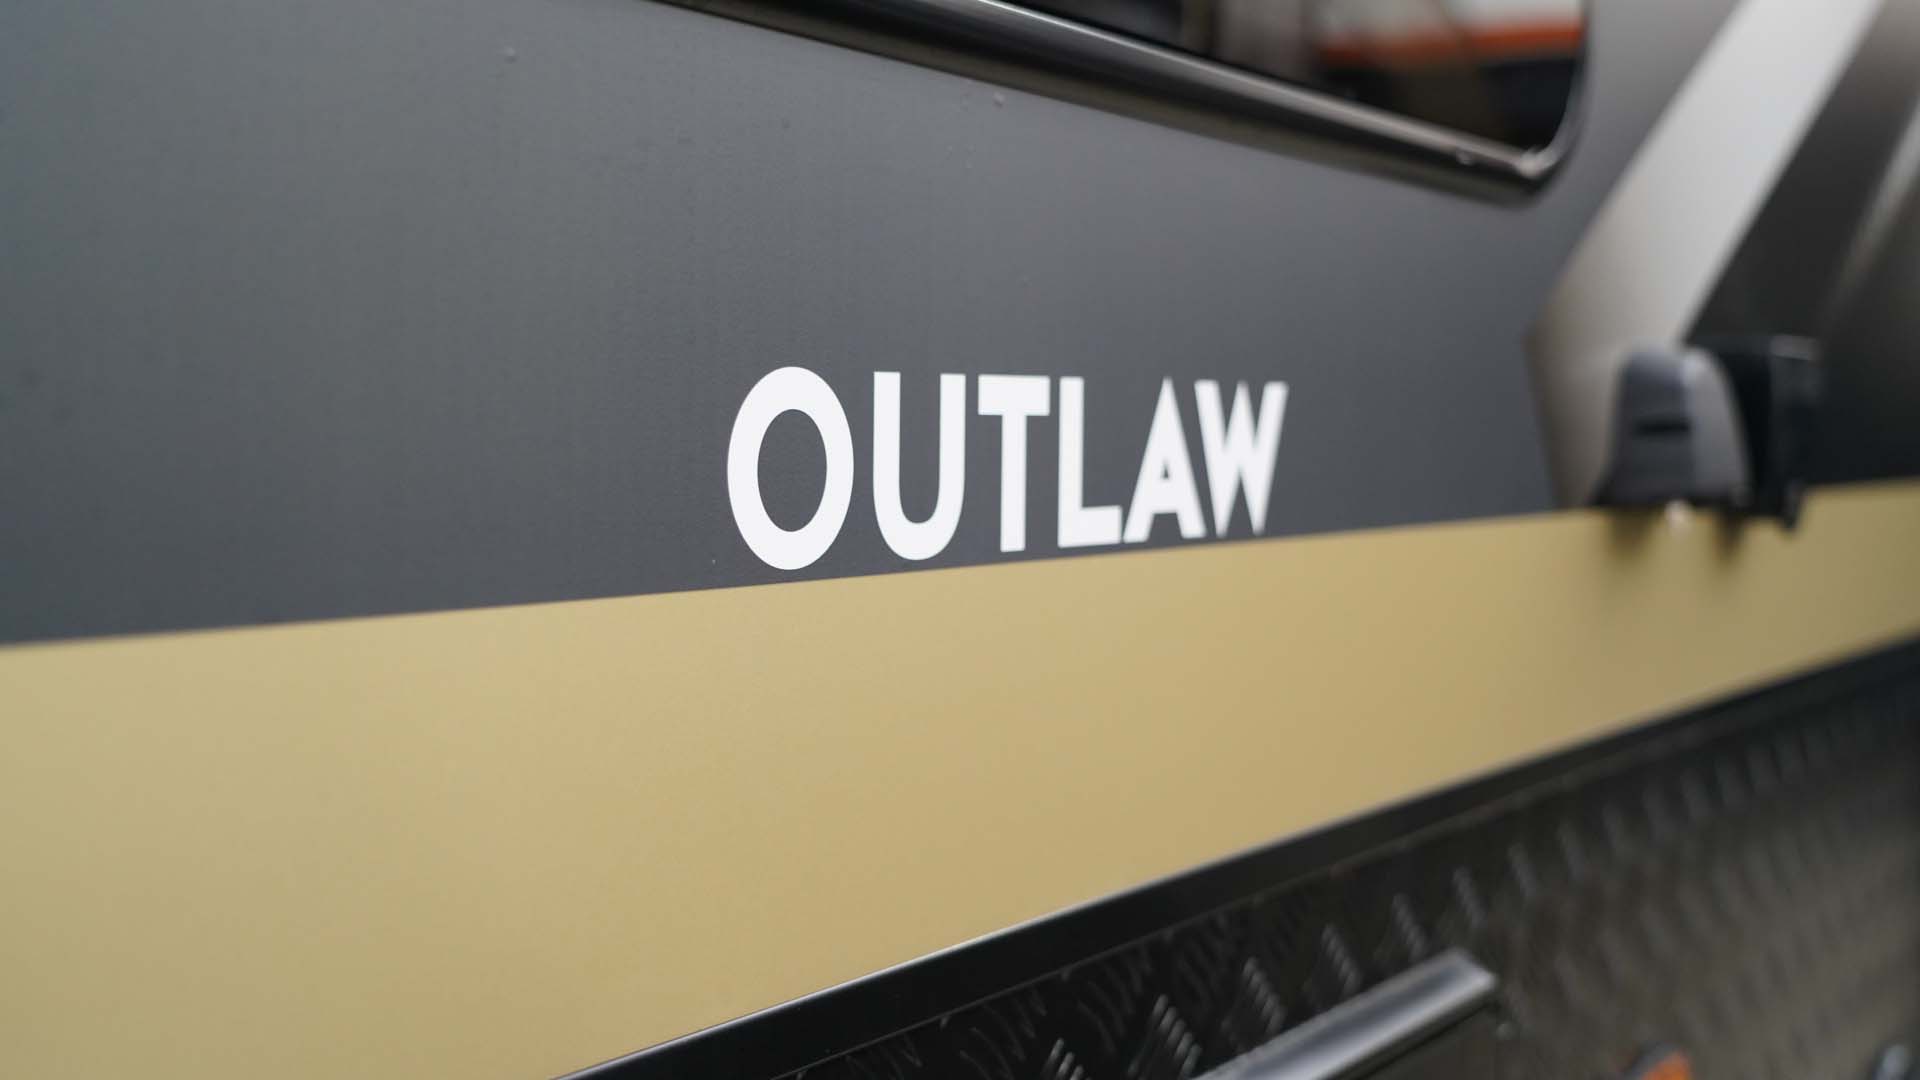 Outlaw (11)